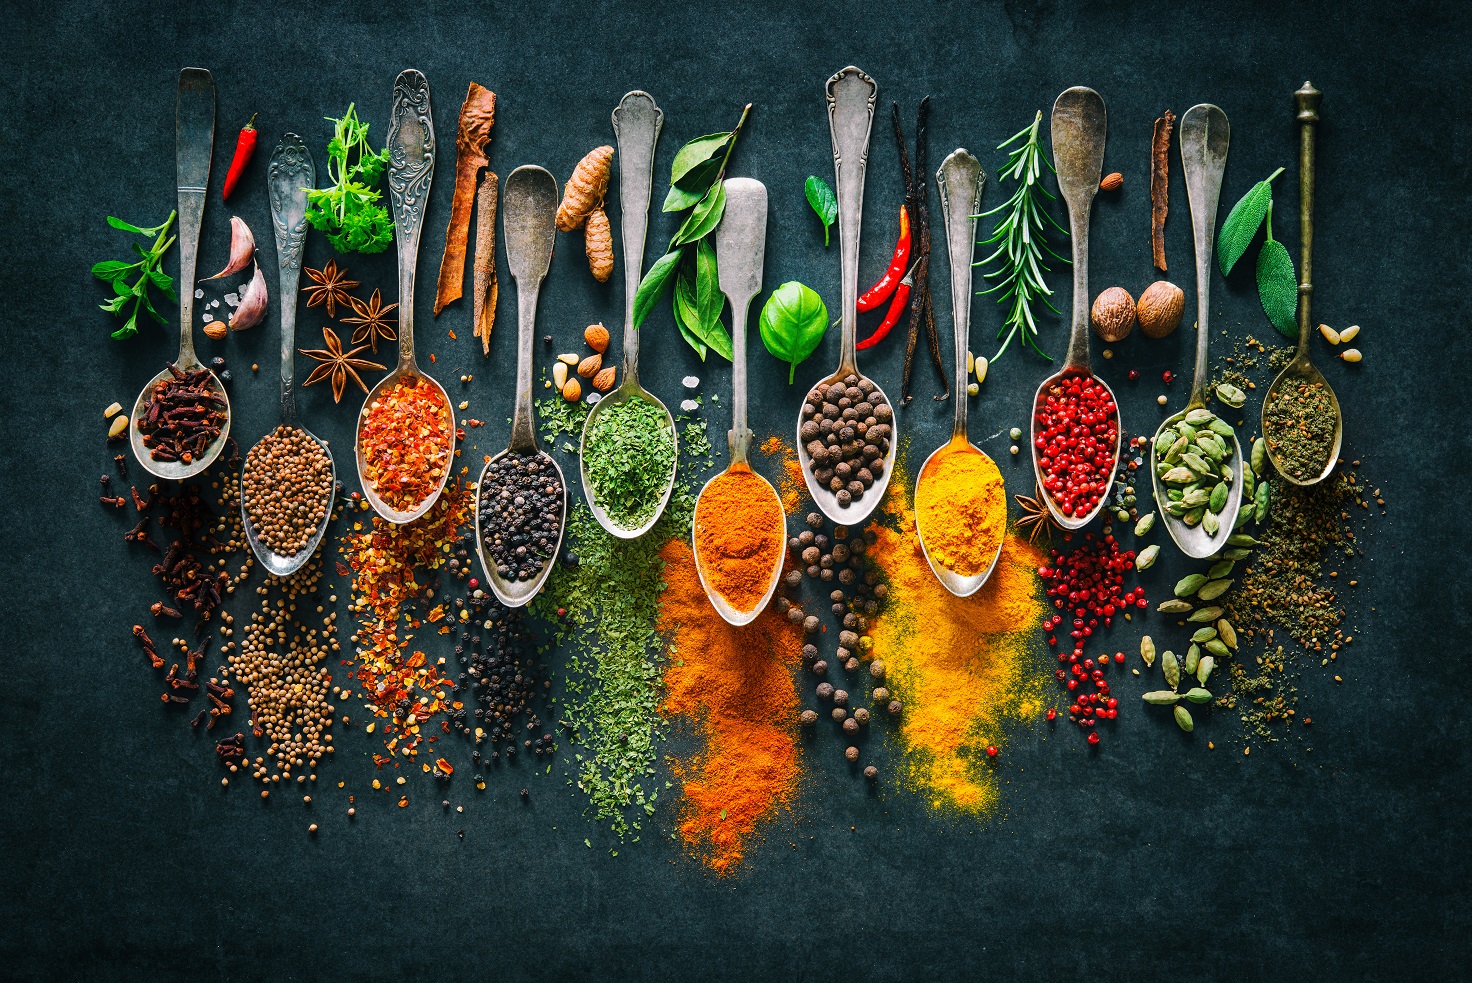 Herbs and spices adulteration highlighted by EU report